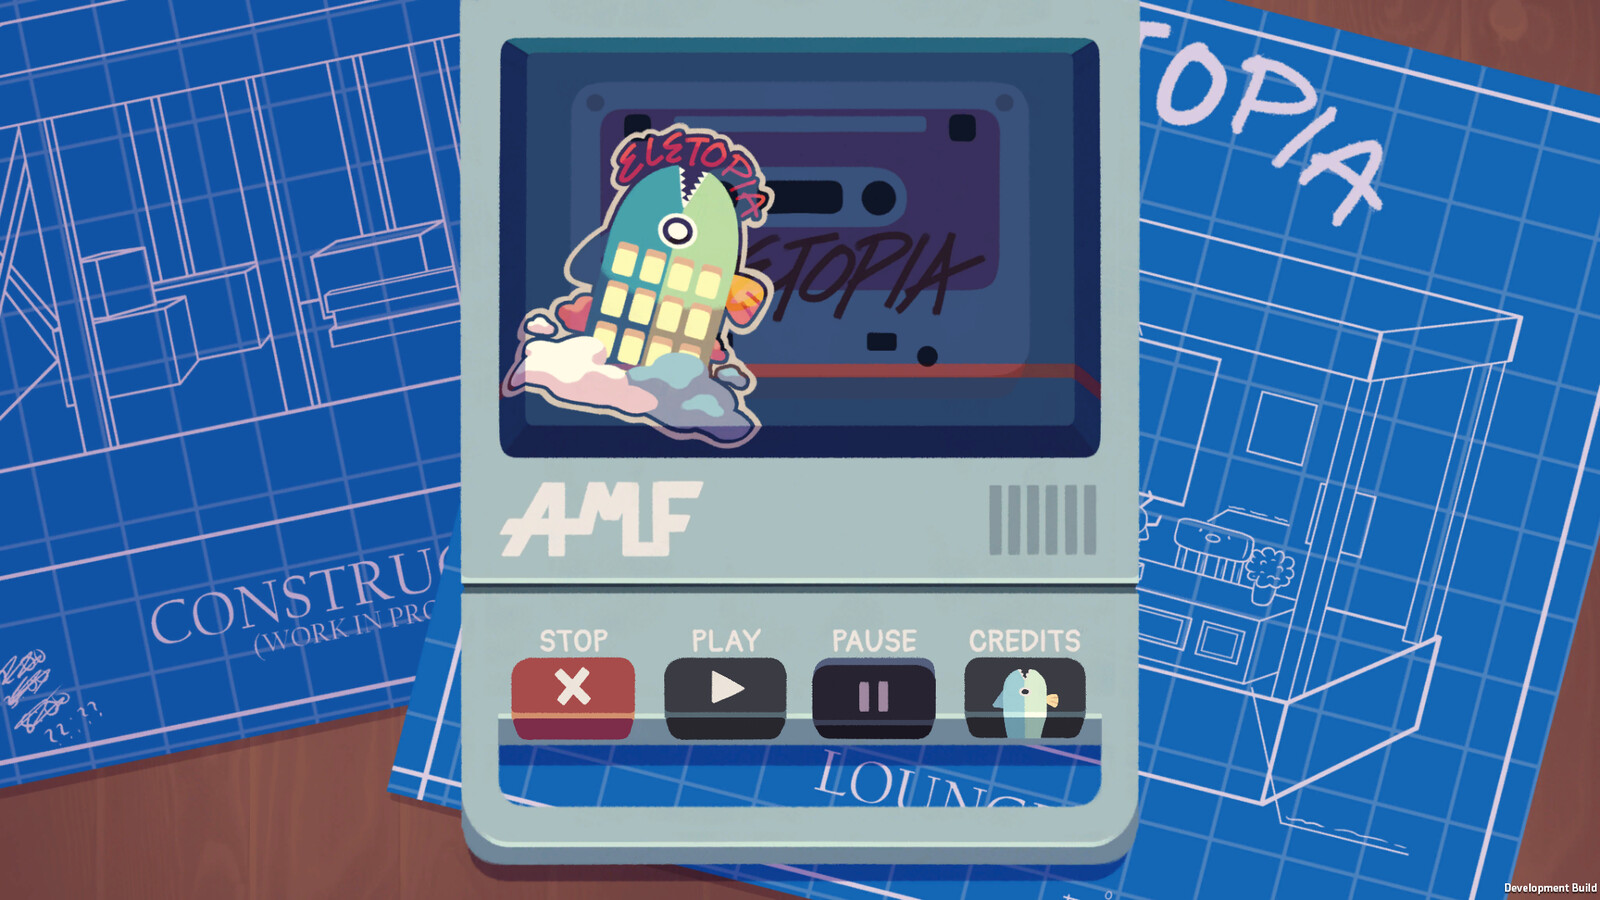 Title screen UI, meant to mimic a cassette player. Blueprints by scarves-of-plenty @ tumblr based on flanosaur @ twitter's environment concept art.